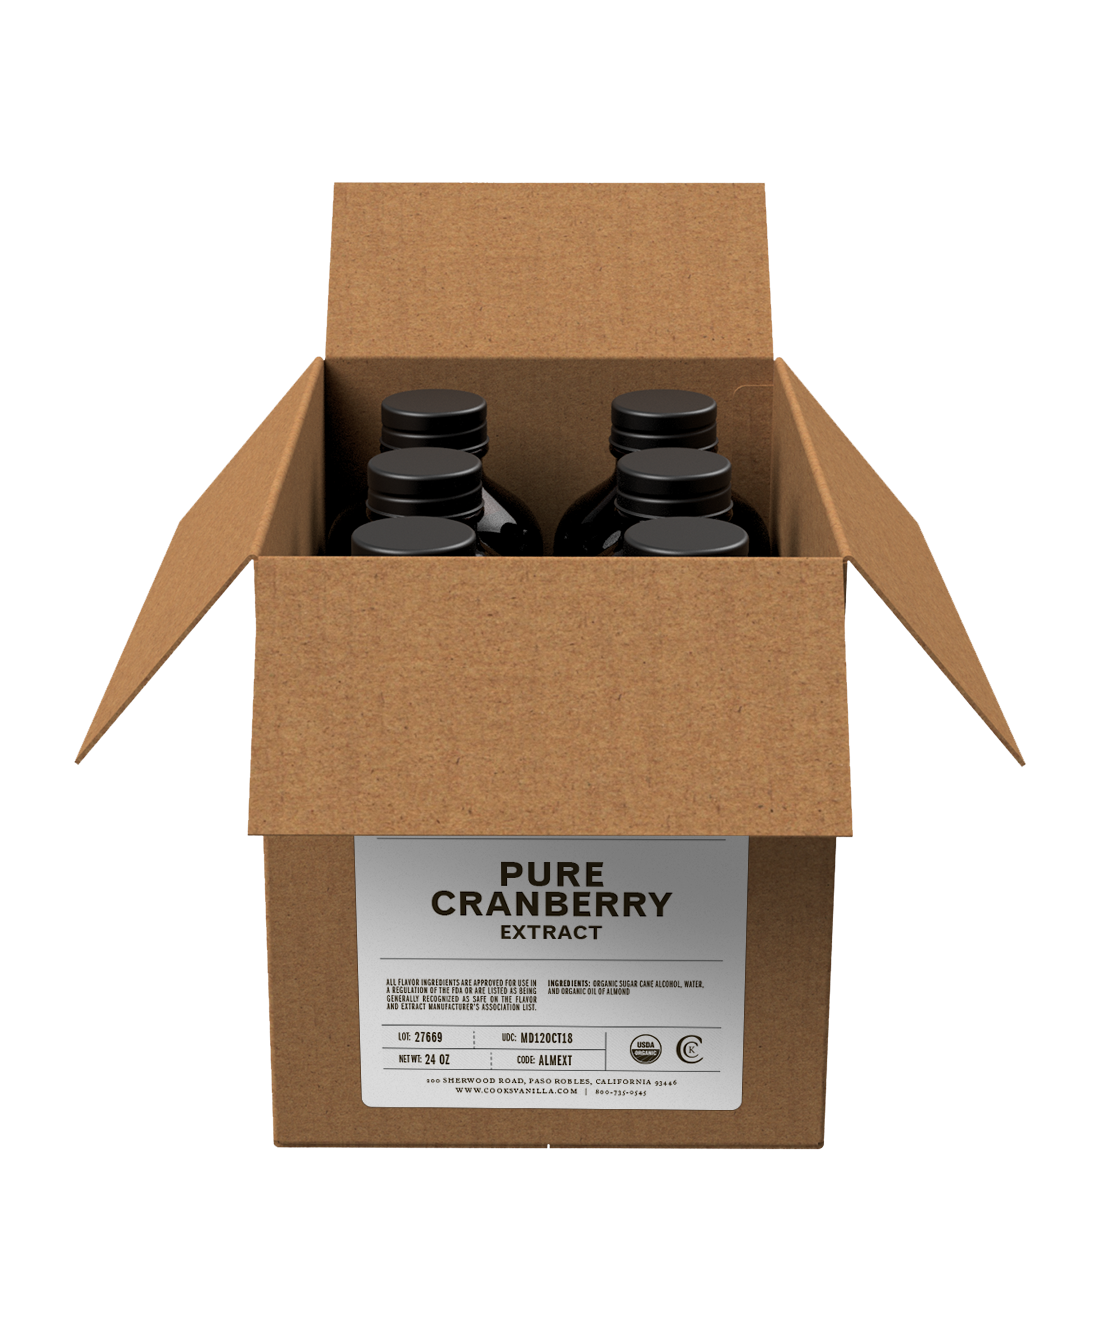 Flavoring | Cranberry Extract (Pure) | Packs and Cases